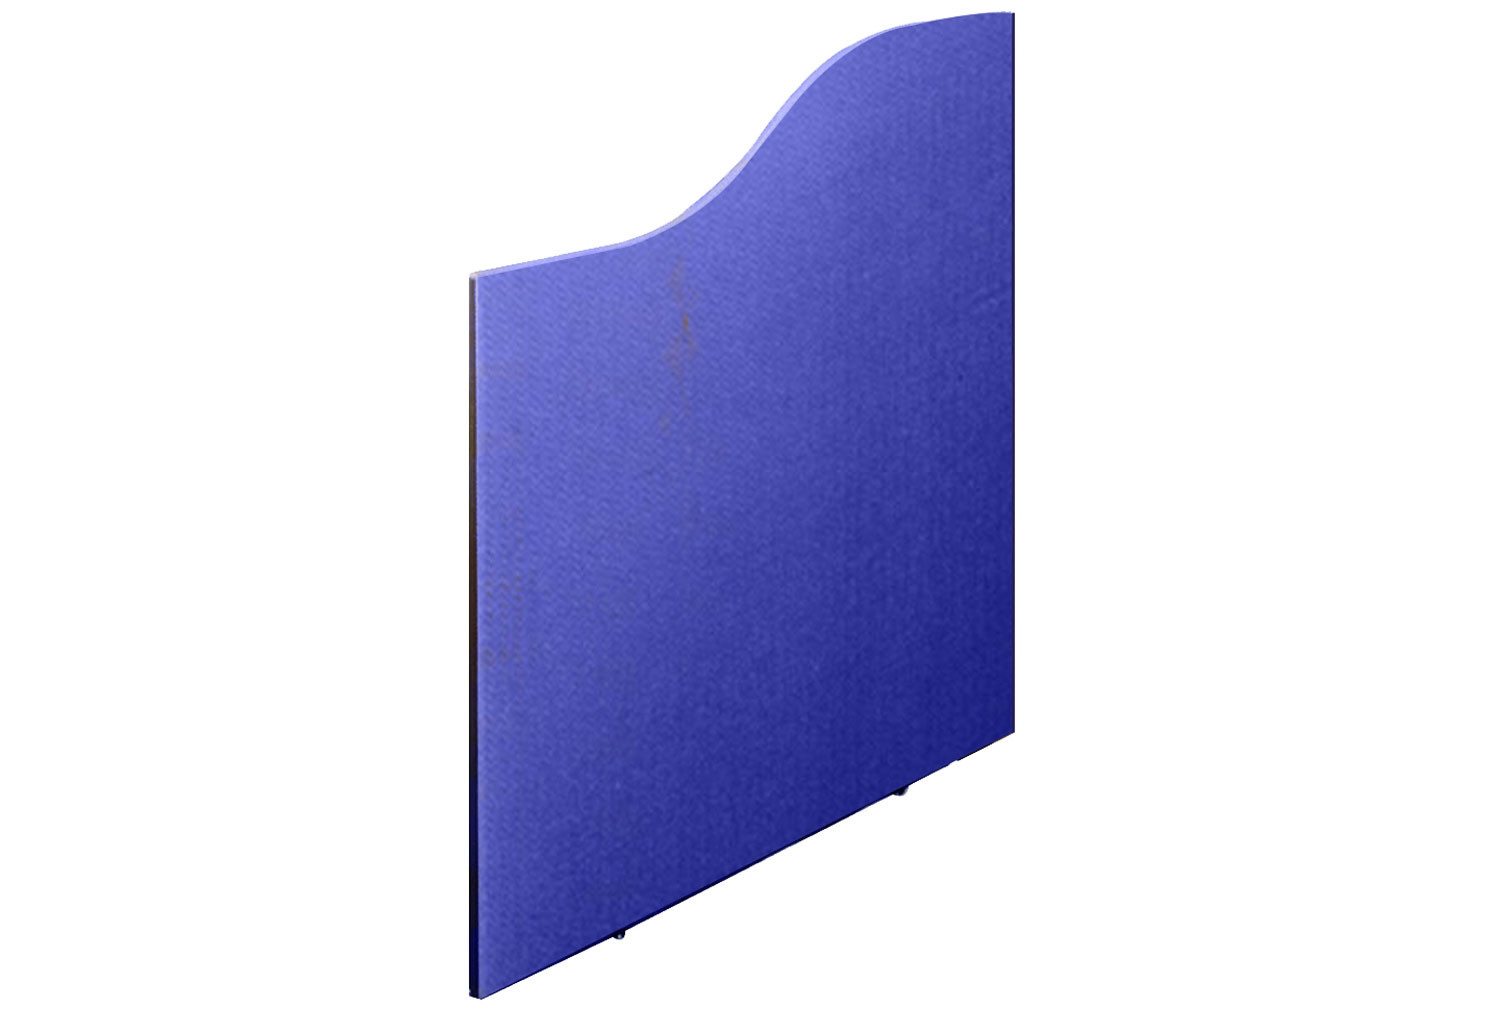 Thompson Wave Free Standing Screens